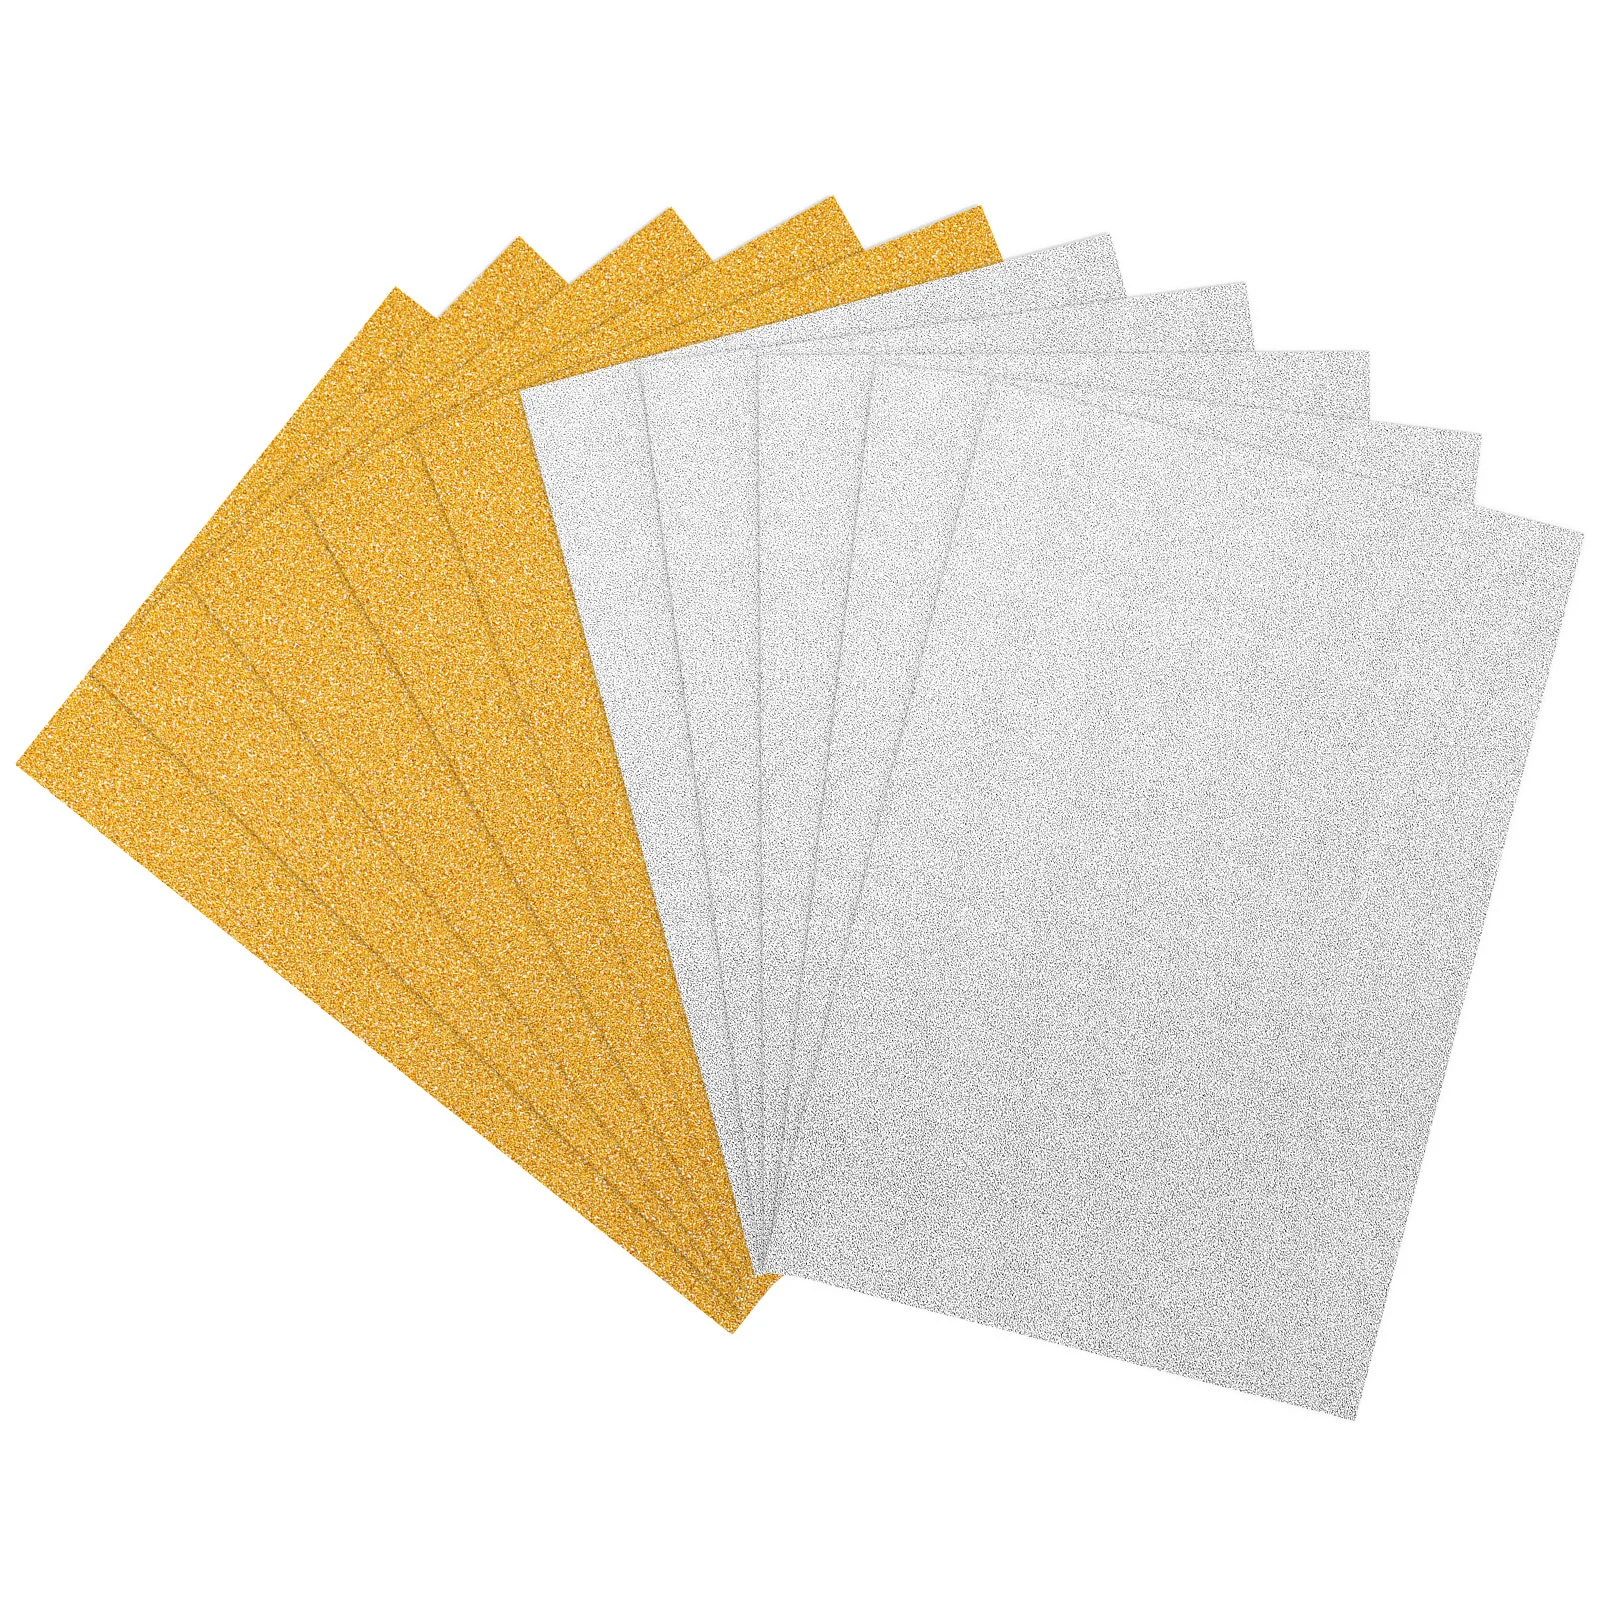 ULTNICE 10pcs Glitter Cardstock Paper Sparkly Paper for DIY Project Gift Box Wrapping and Scrapbooking (Gold & Silver)